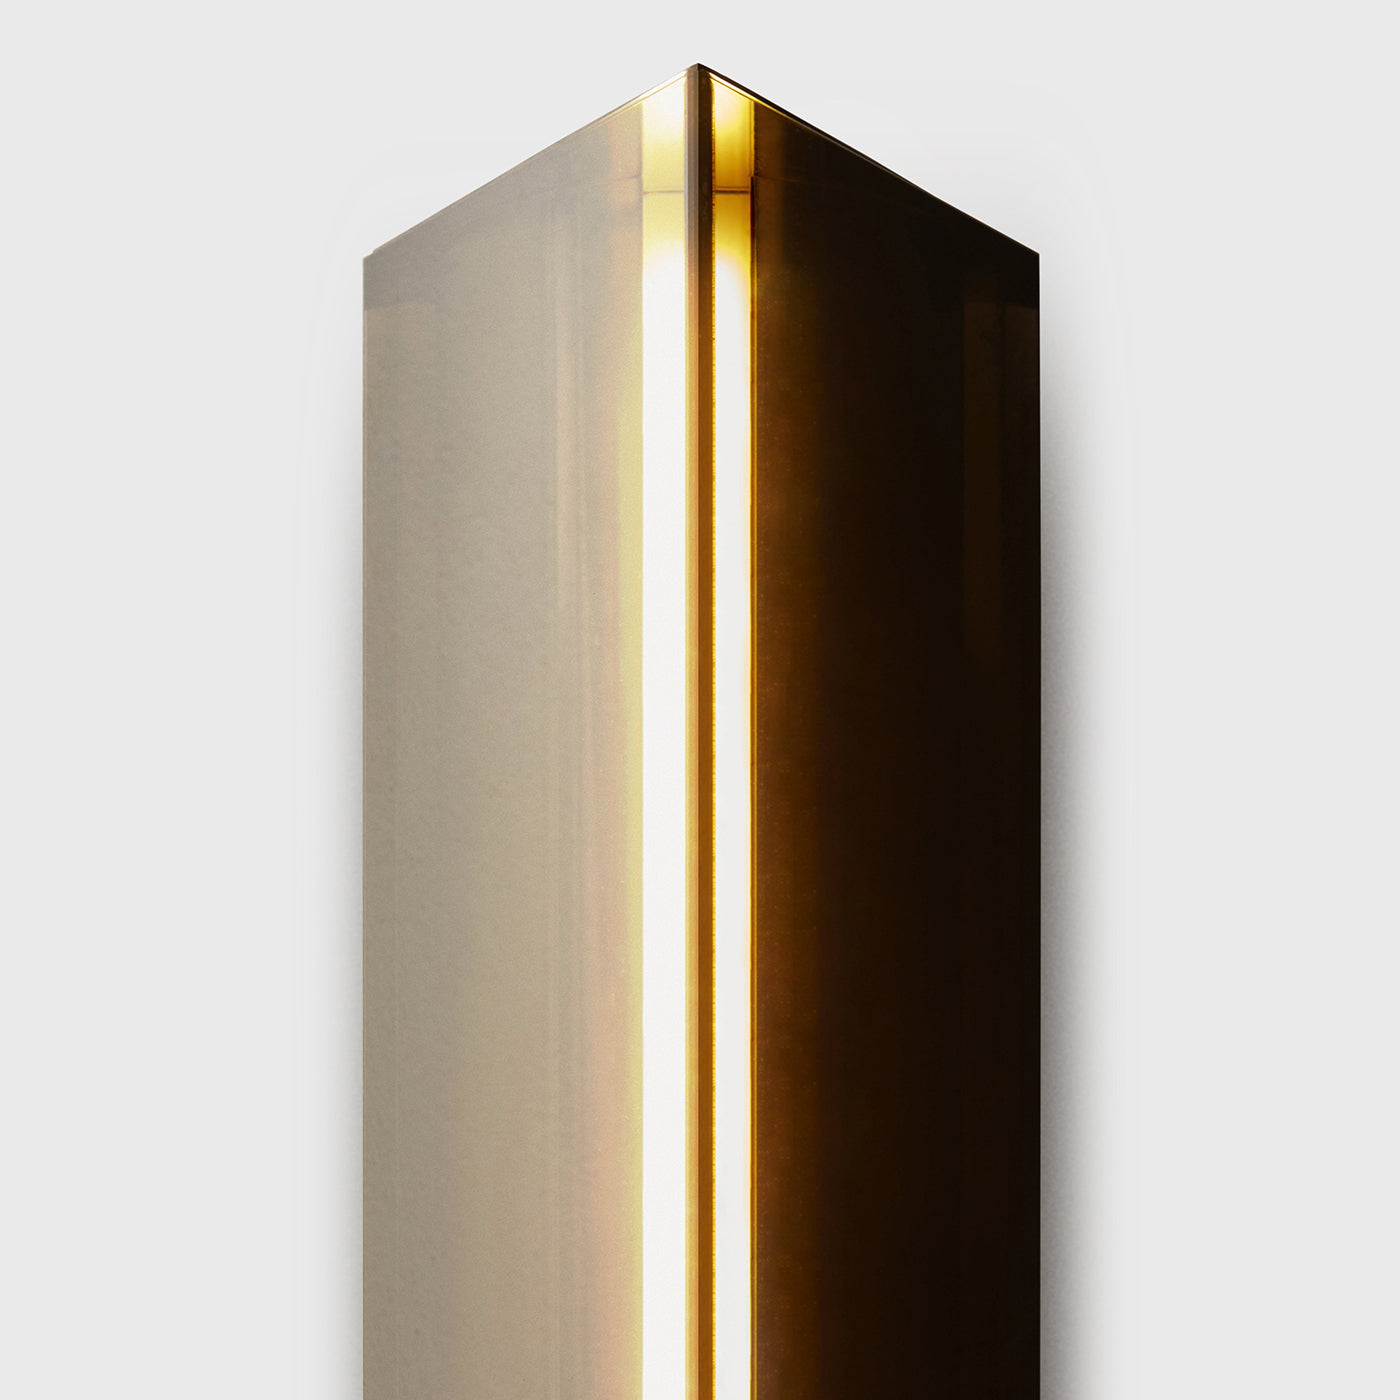 Spettro Tall Black and Steel Sconce - Alternative view 3